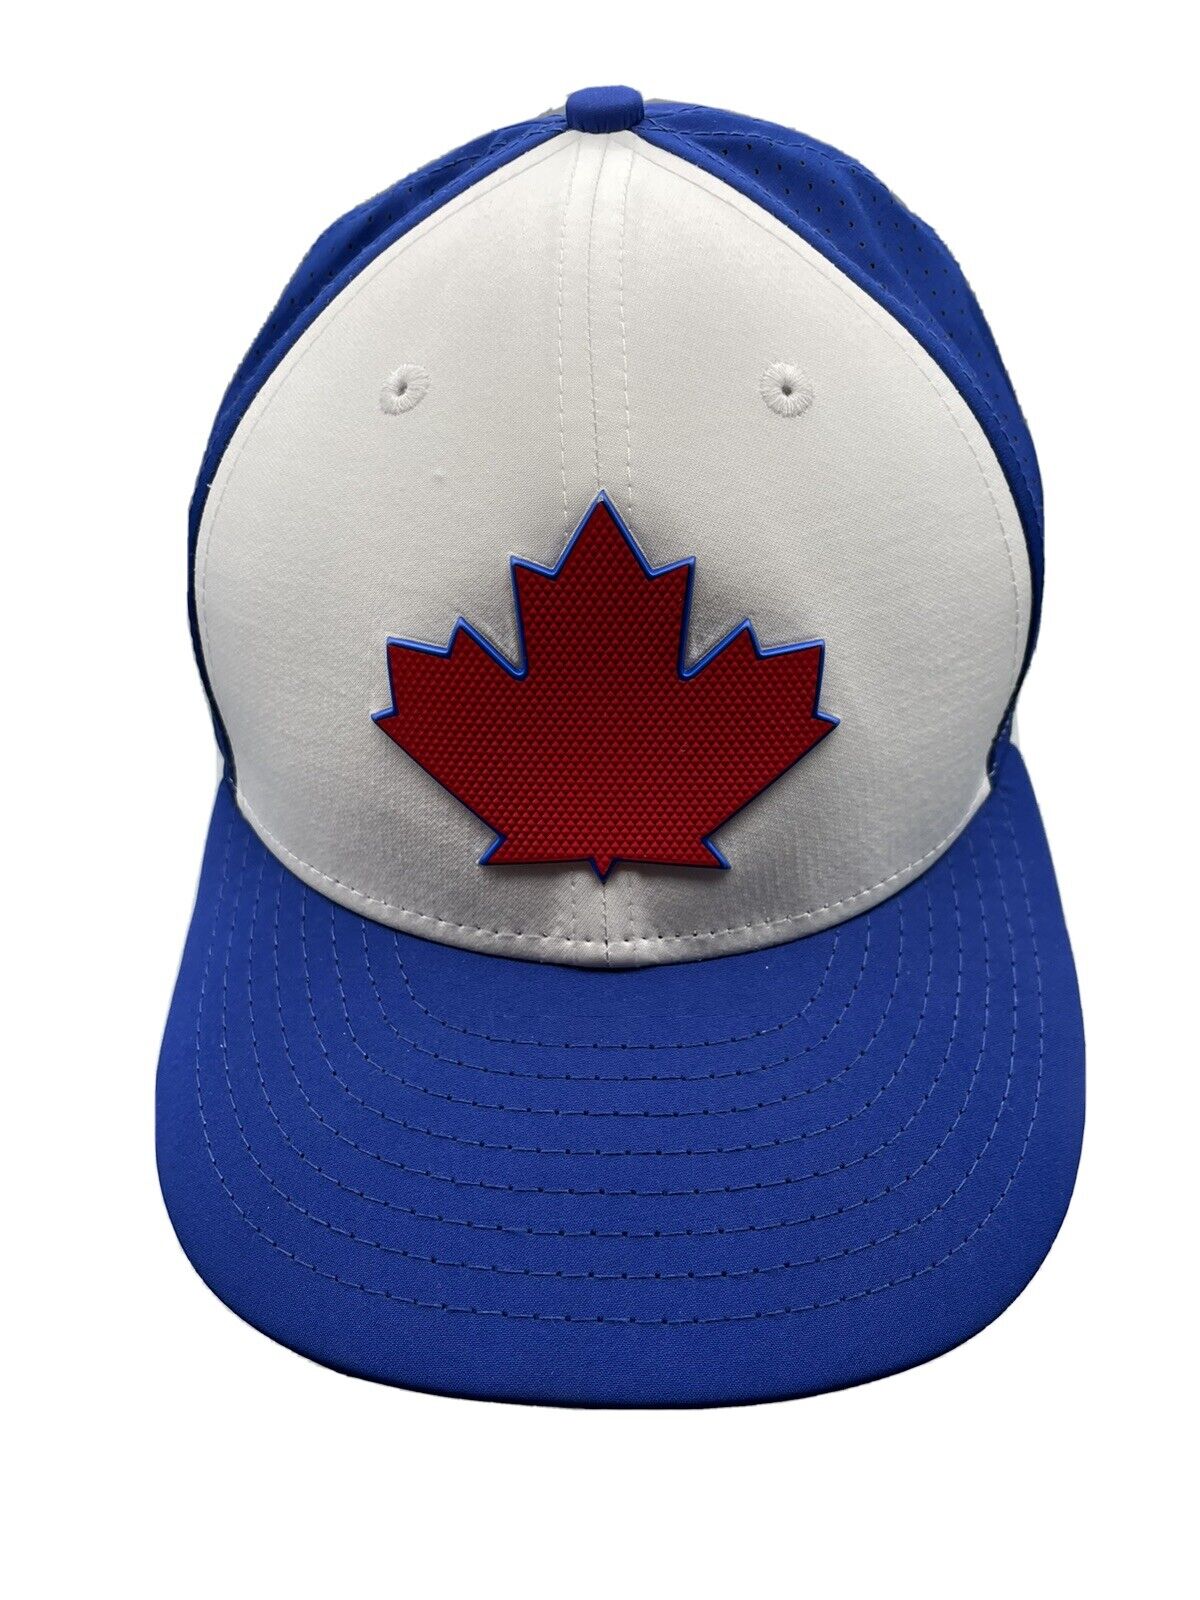 New MLB Toronto Blue Jays New Era Red Maple Leaf 59FIFTY Fitted Hat Size 7 7/8